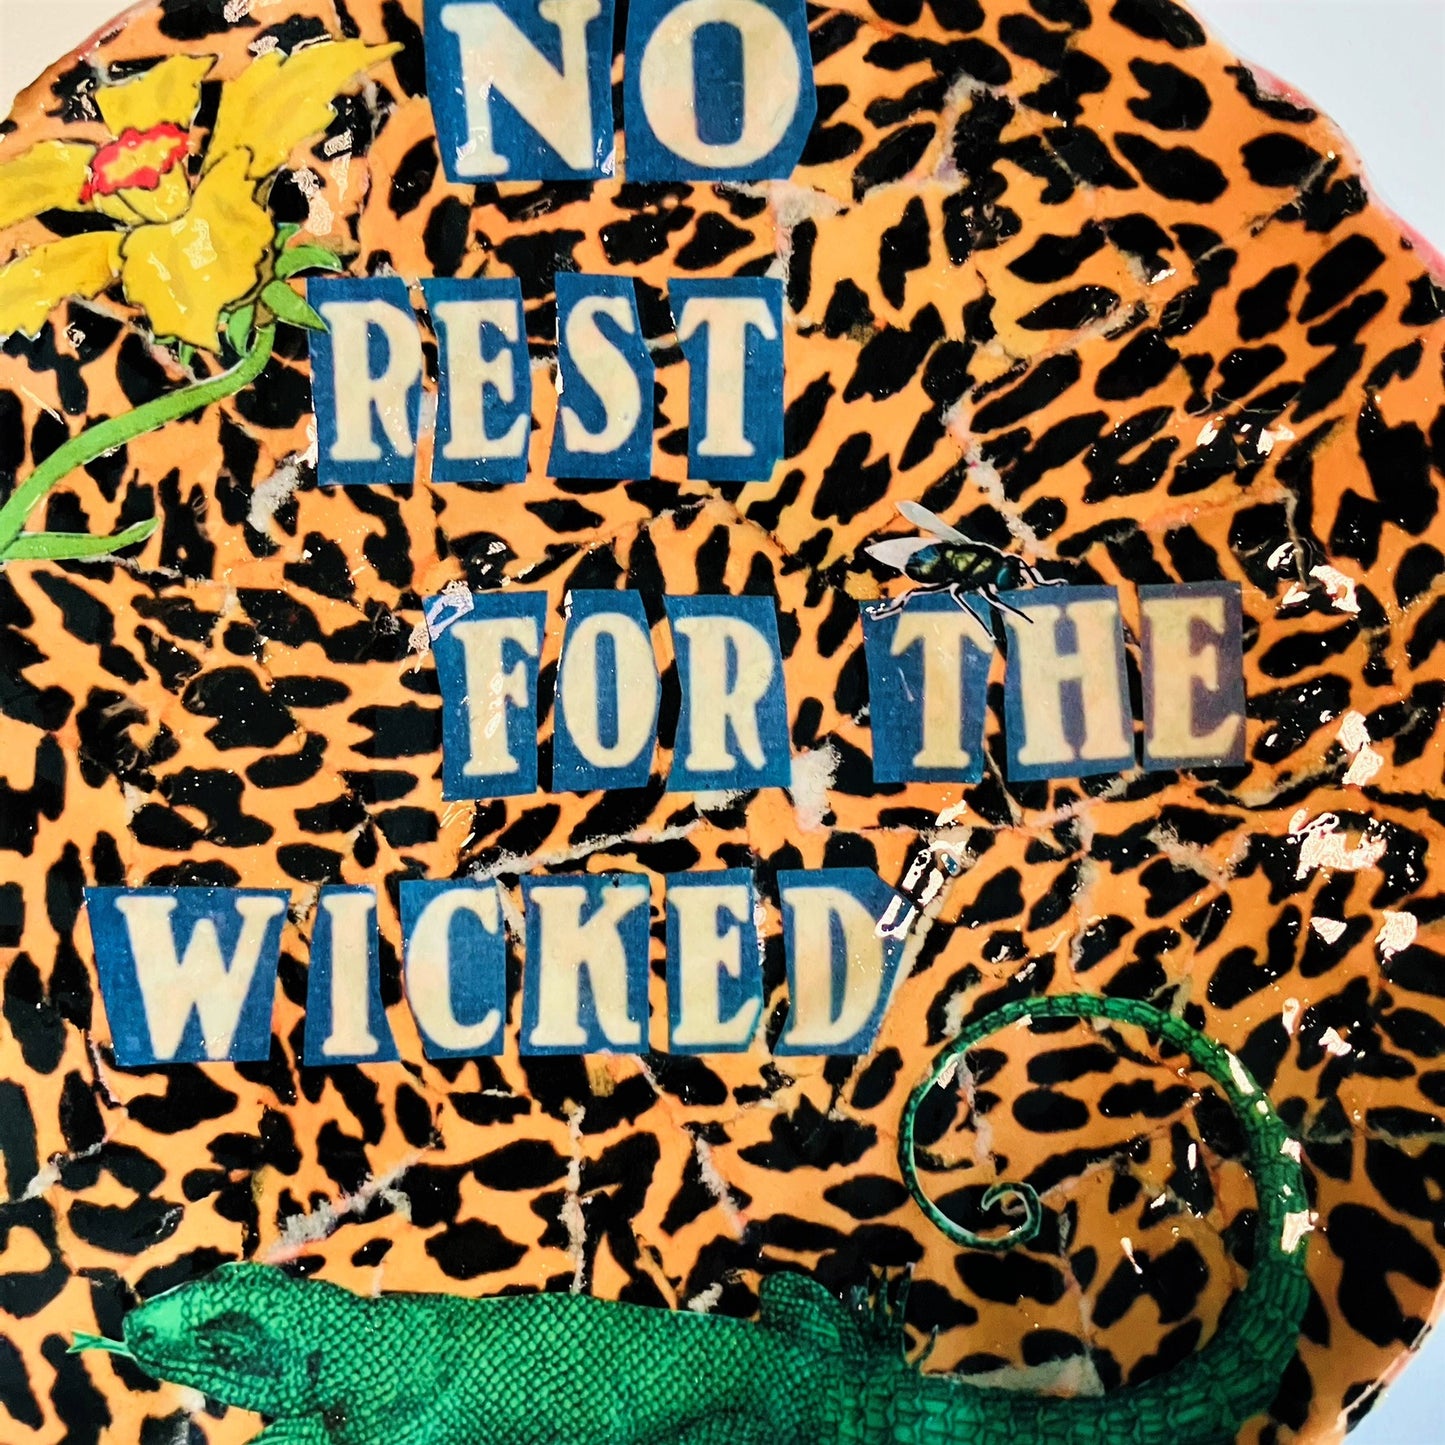 Orange Leopard Print Upcycled Wall Plate - "No Rest For The Wicked" - by House of Frisson